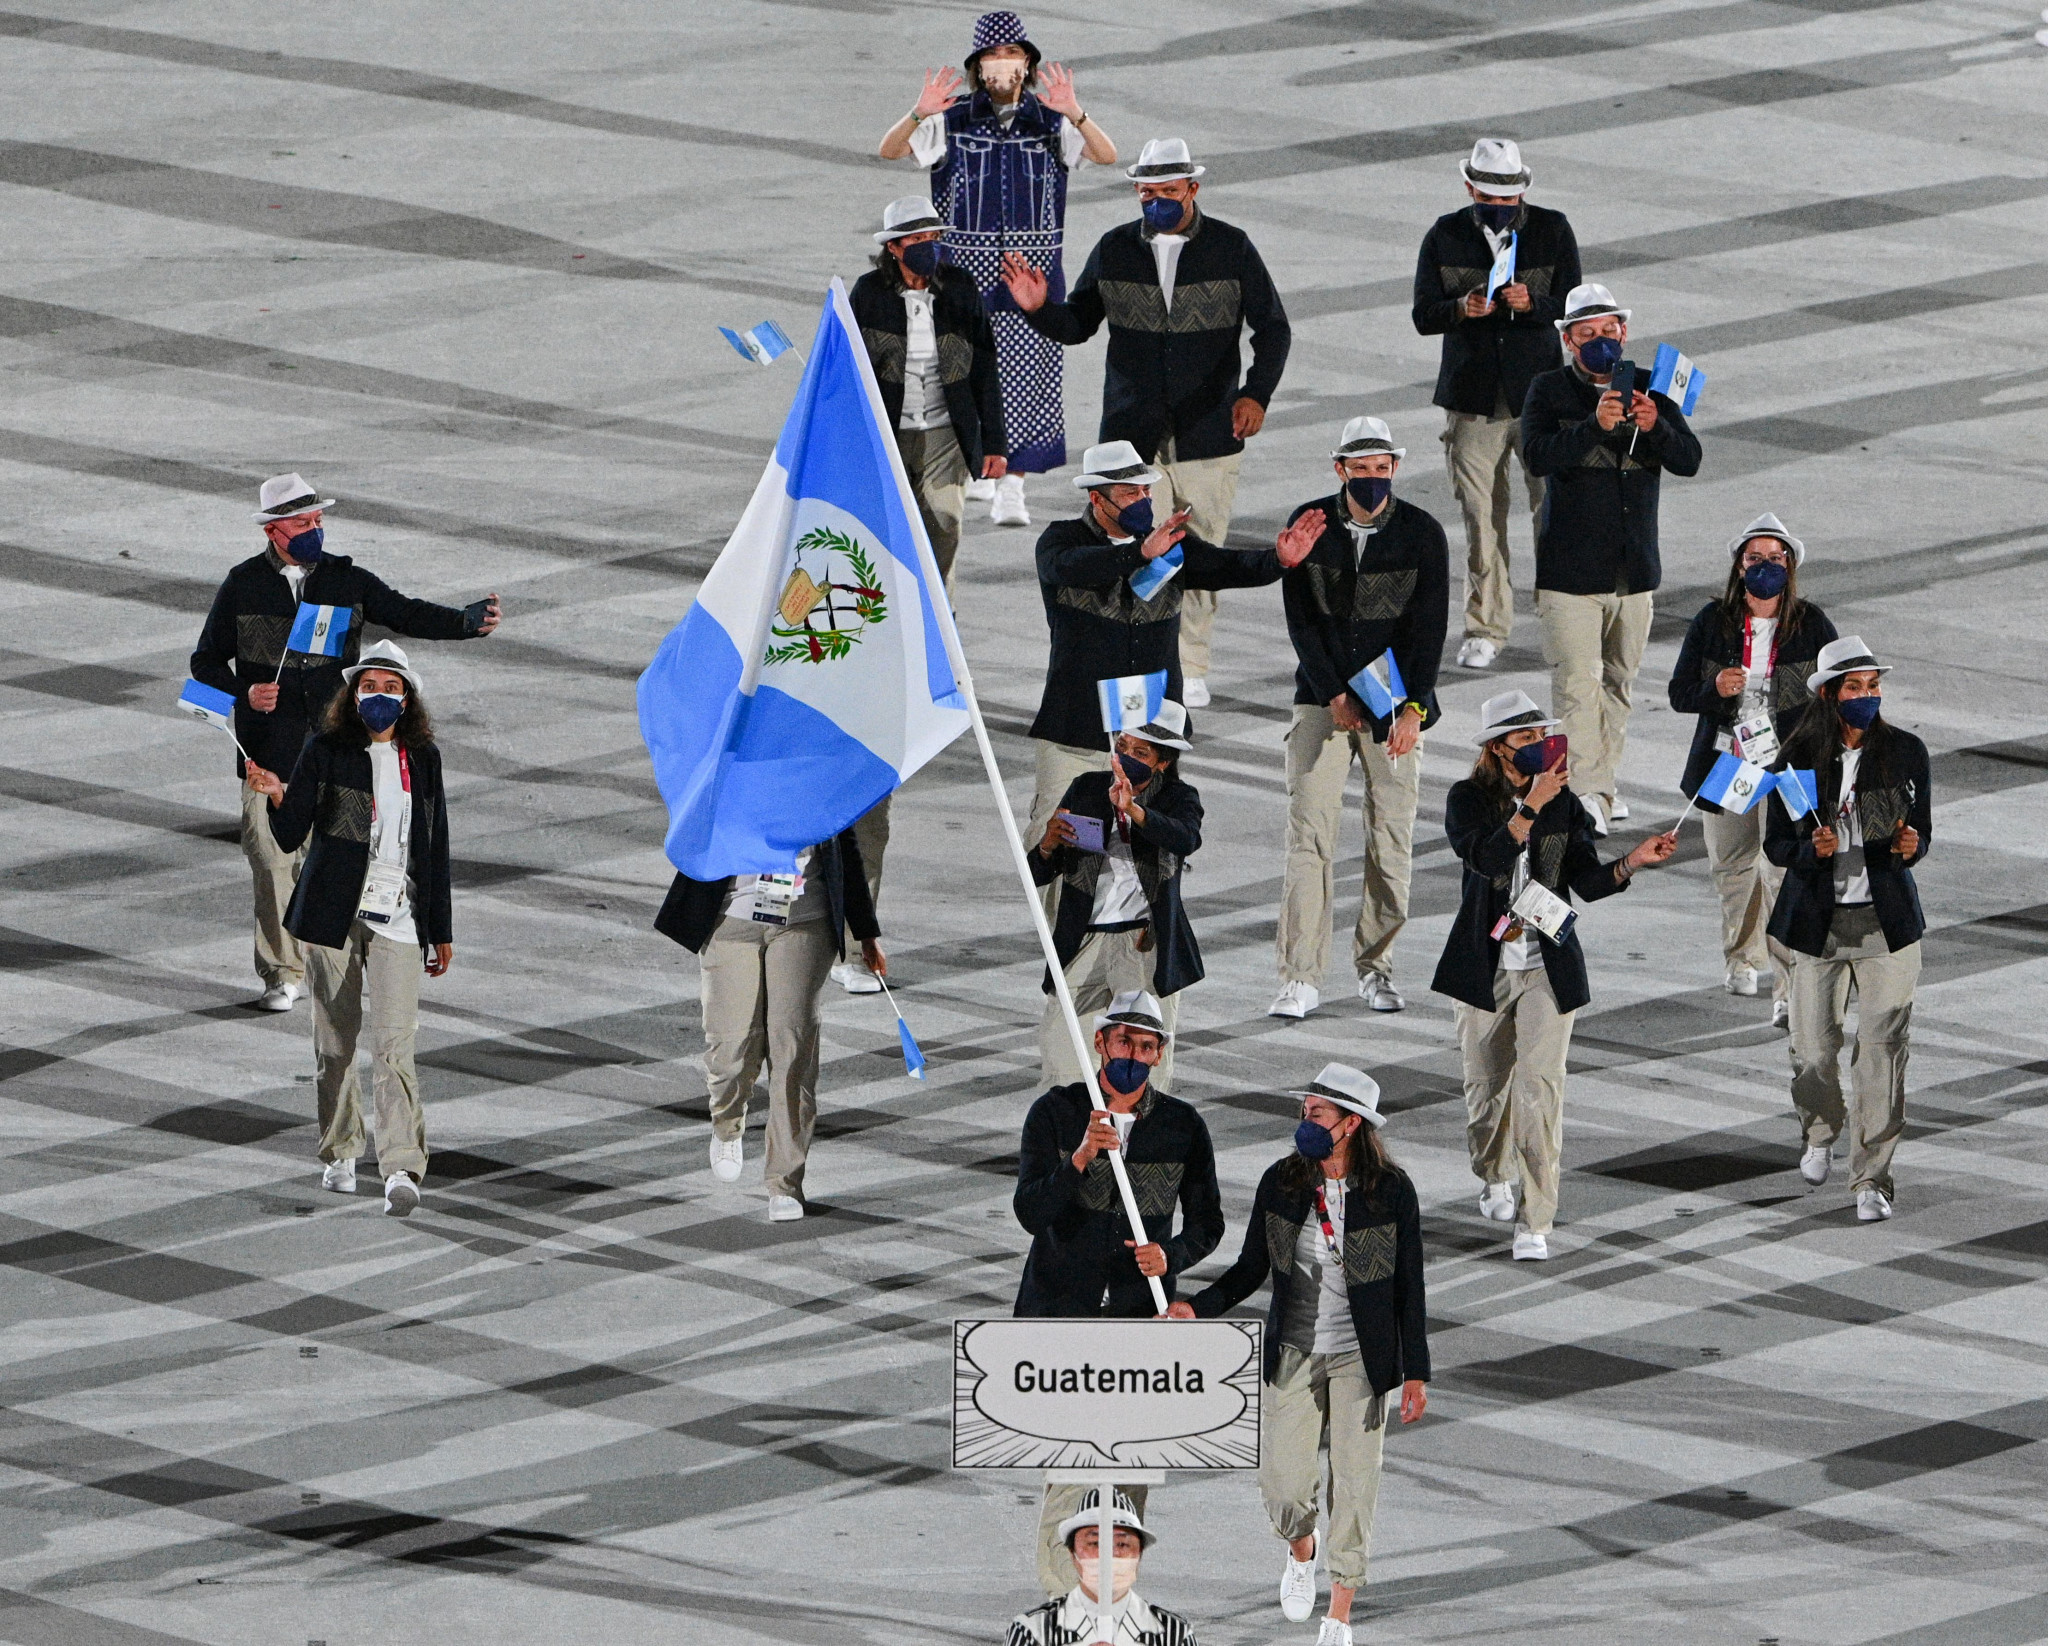 The Guatemalan Olympic Committee remains suspended by the IOC due to legal issues with its governance ©Getty Images